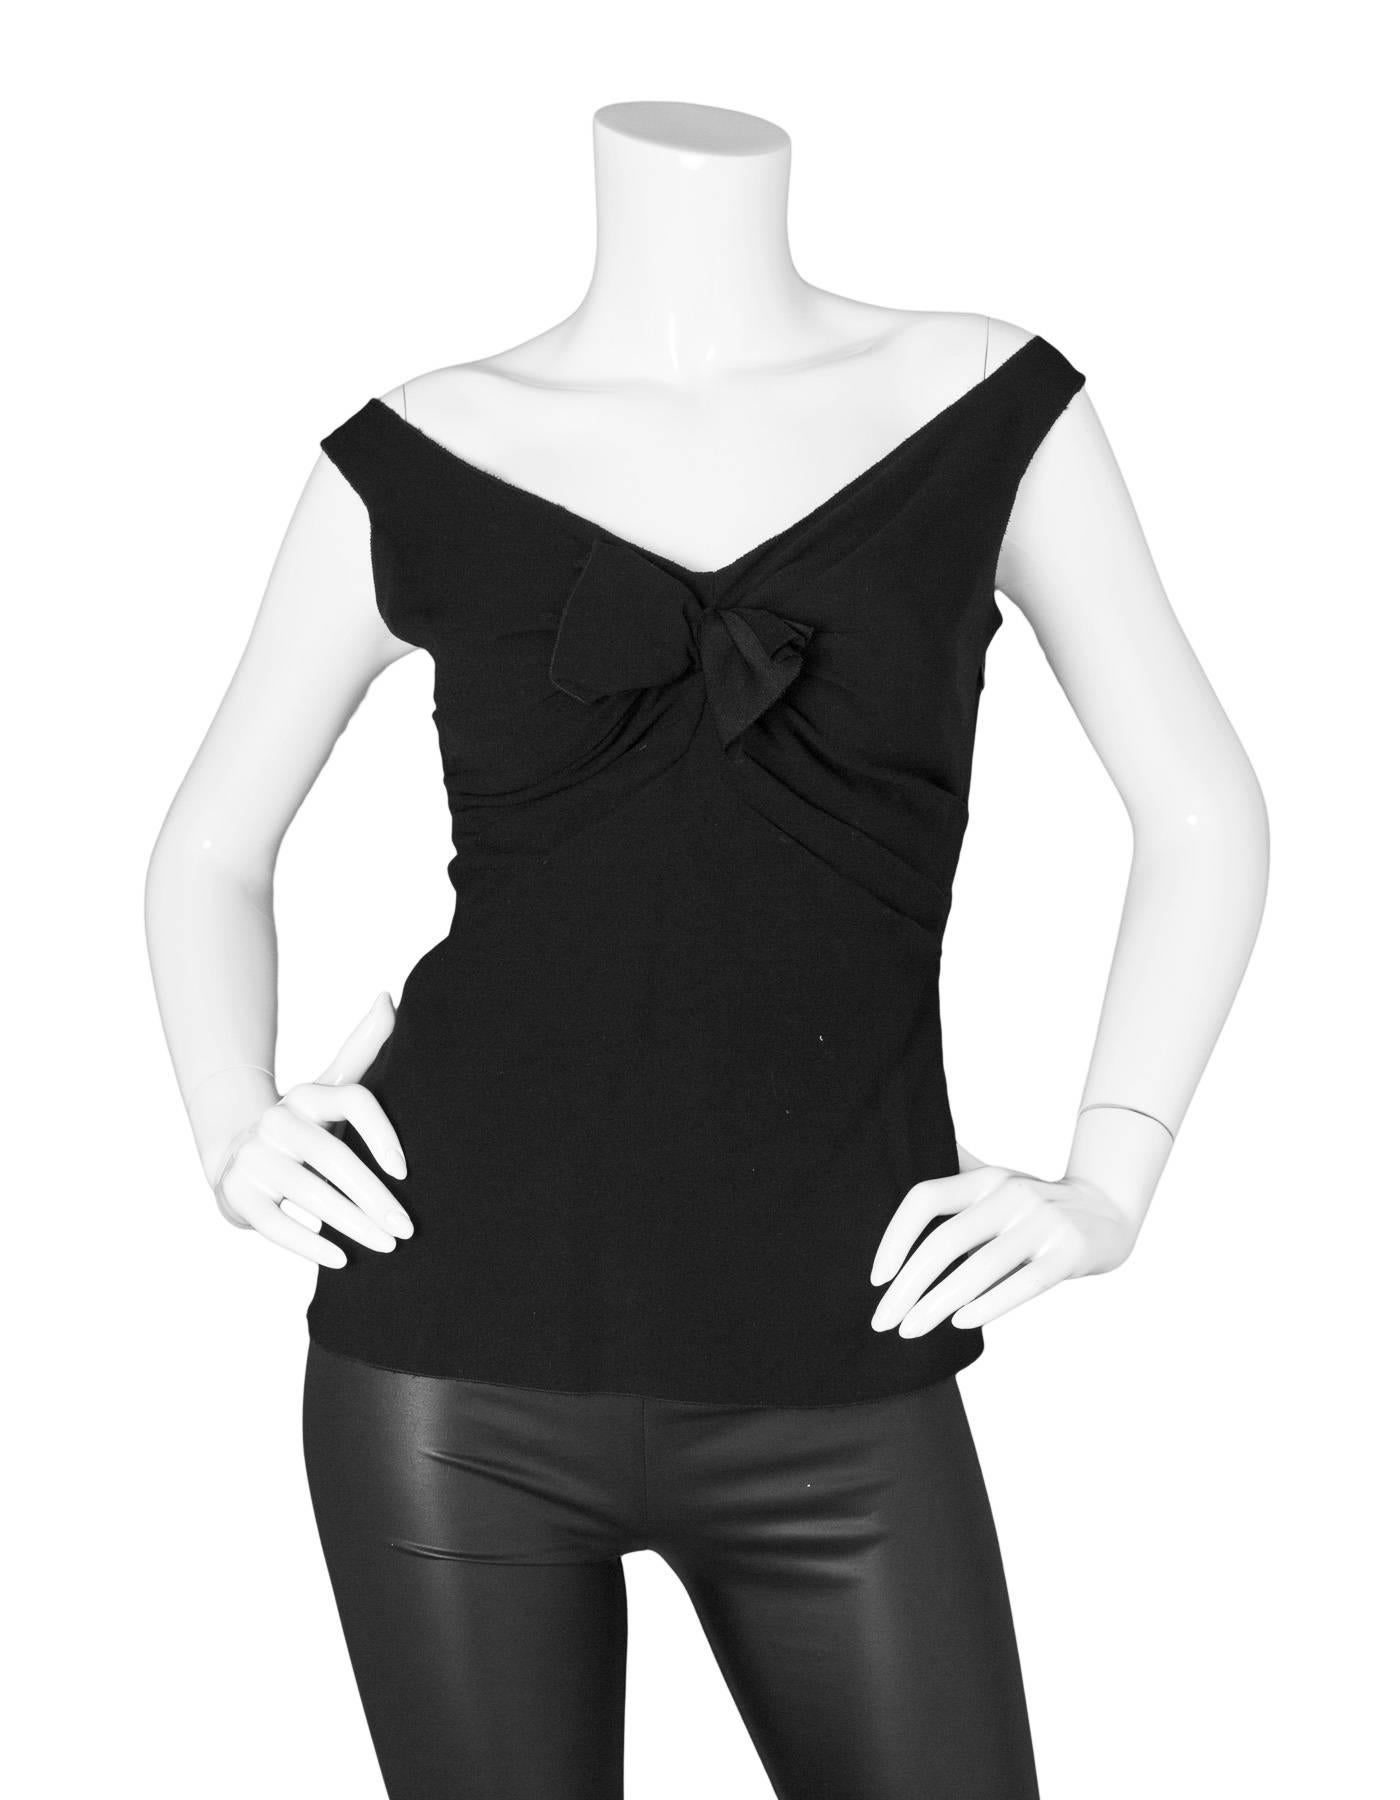 Prada Black Sleeveless Ruched Blouse 
Features bow at ruched neckline

Made In: Italy
Color: Black
Composition: 78% acetate, 22% polyethylene
Lining: None
Closure/Opening: Side zipper
Exterior Pockets: None
Interior Pockets: None
Overall Condition: